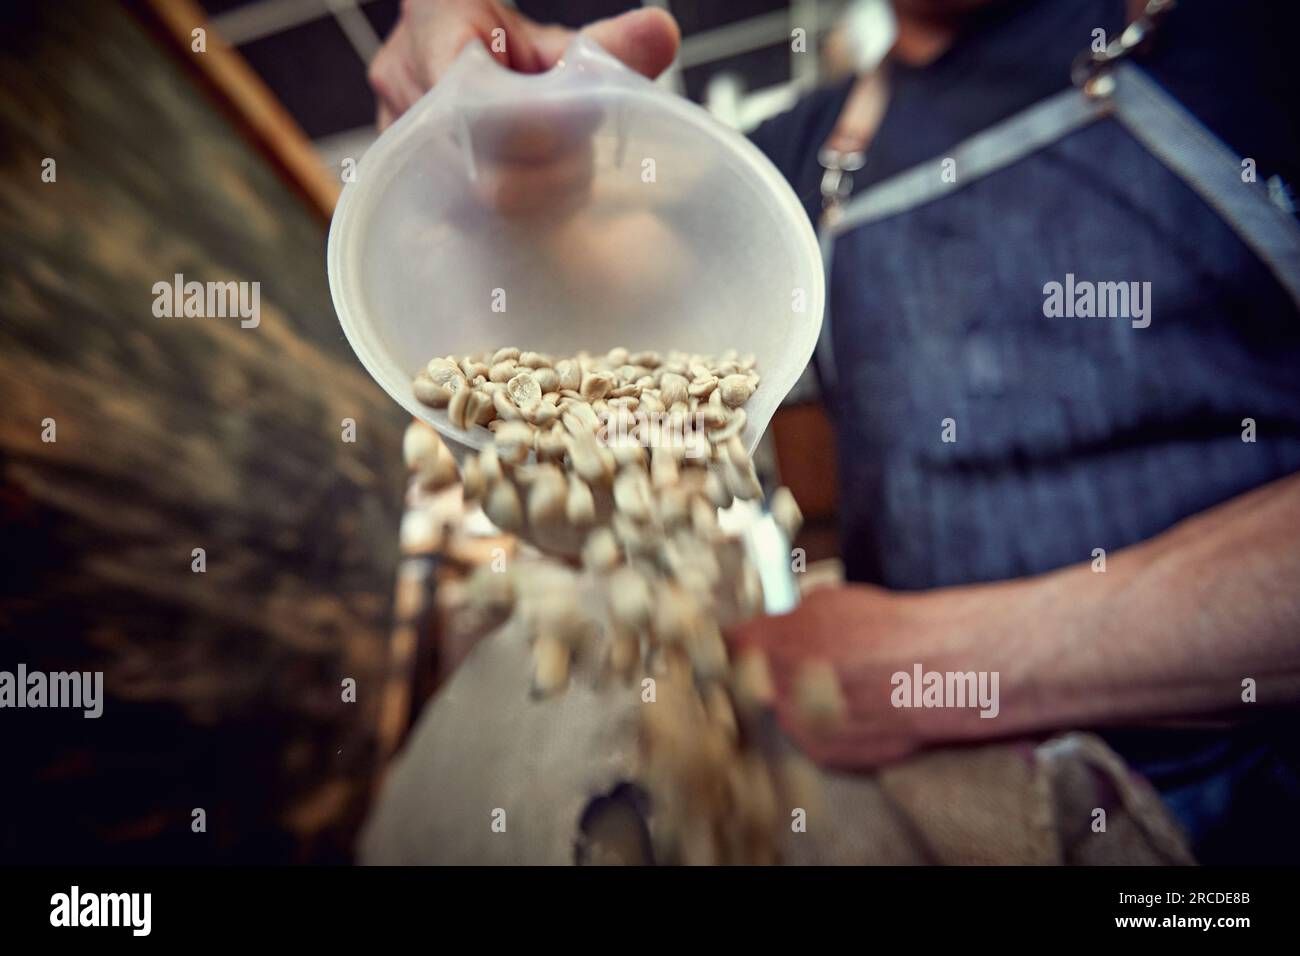 wide angle close up detail of whole grain coffee spilling from plastic dish into a sack by caucasian male Stock Photo